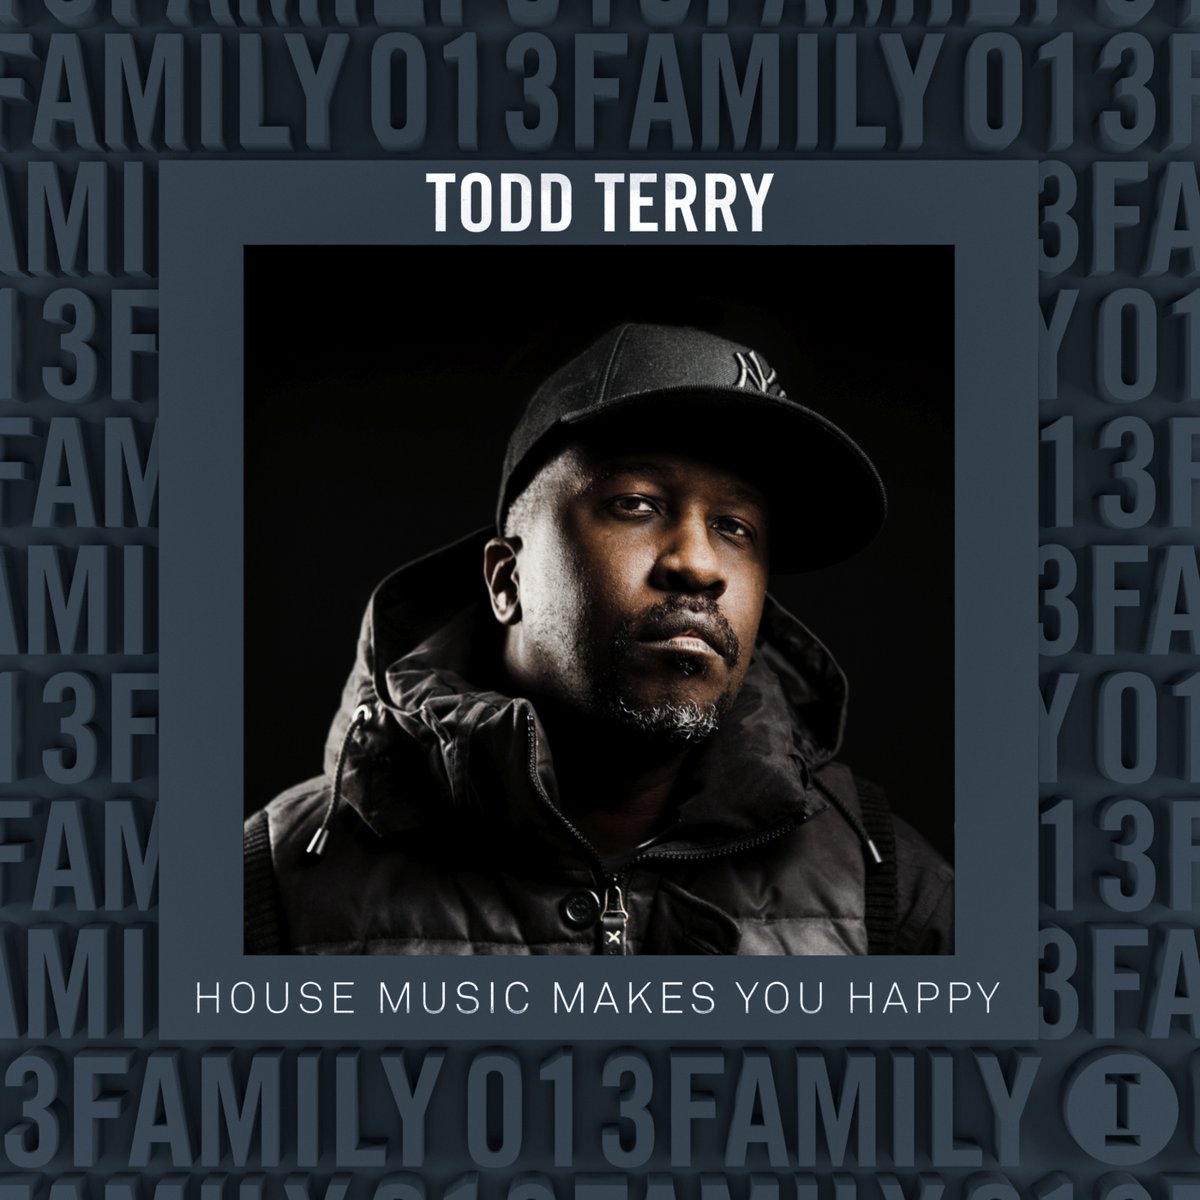 Check out my @AppleMusic exclusive @toolroomrecords 'House Makes You Happy' #djmix w/ @crystalwaters1 @thisiswh0 @djmarkknight @jameshurr @LeftwingKody @mecajaexiste @rivastarr @FancyIncMusic @TCTS @edenprincemusic @stadiumx @crusyofficial @JennMorelFlow music.apple.com/us/album/famil…